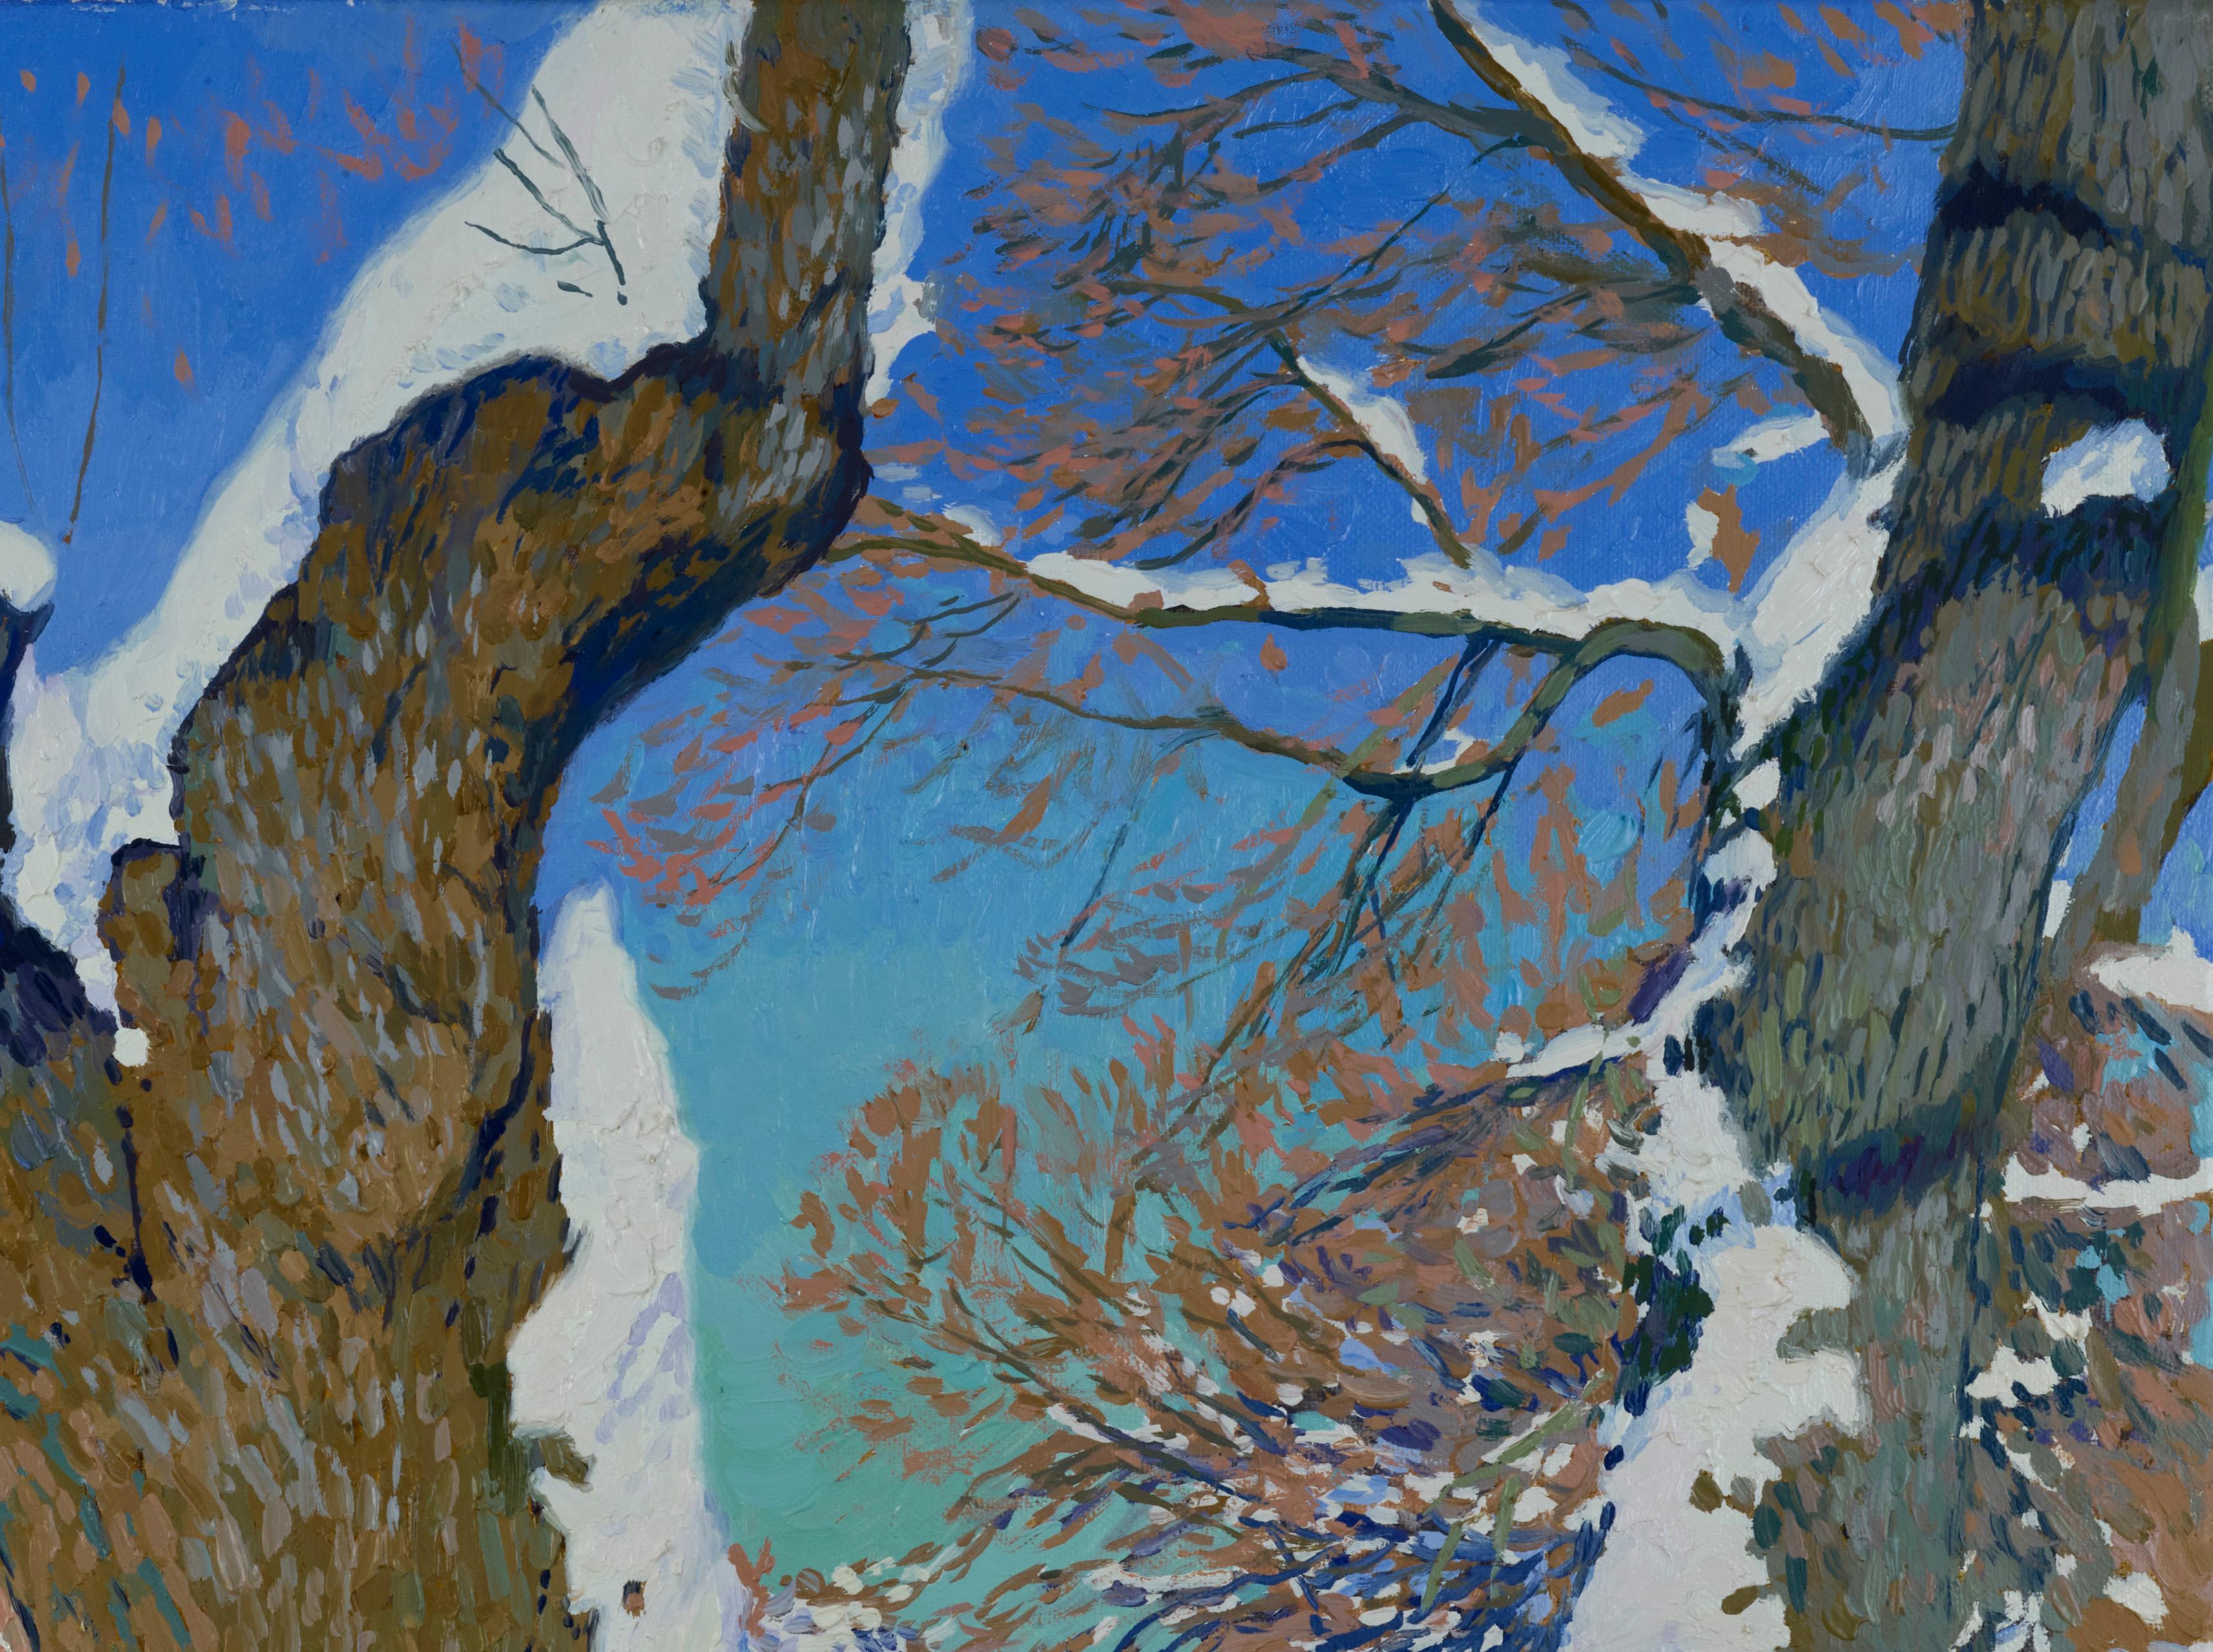 In winter, the enchantress wrapped trees in the Kolomensky garden with her duvet. Many branches of trees broke due to the large amount of snow, and the snow itself looks like foam, so lush it lay on the branch.
Exhibition:
2019 Exhibition at the